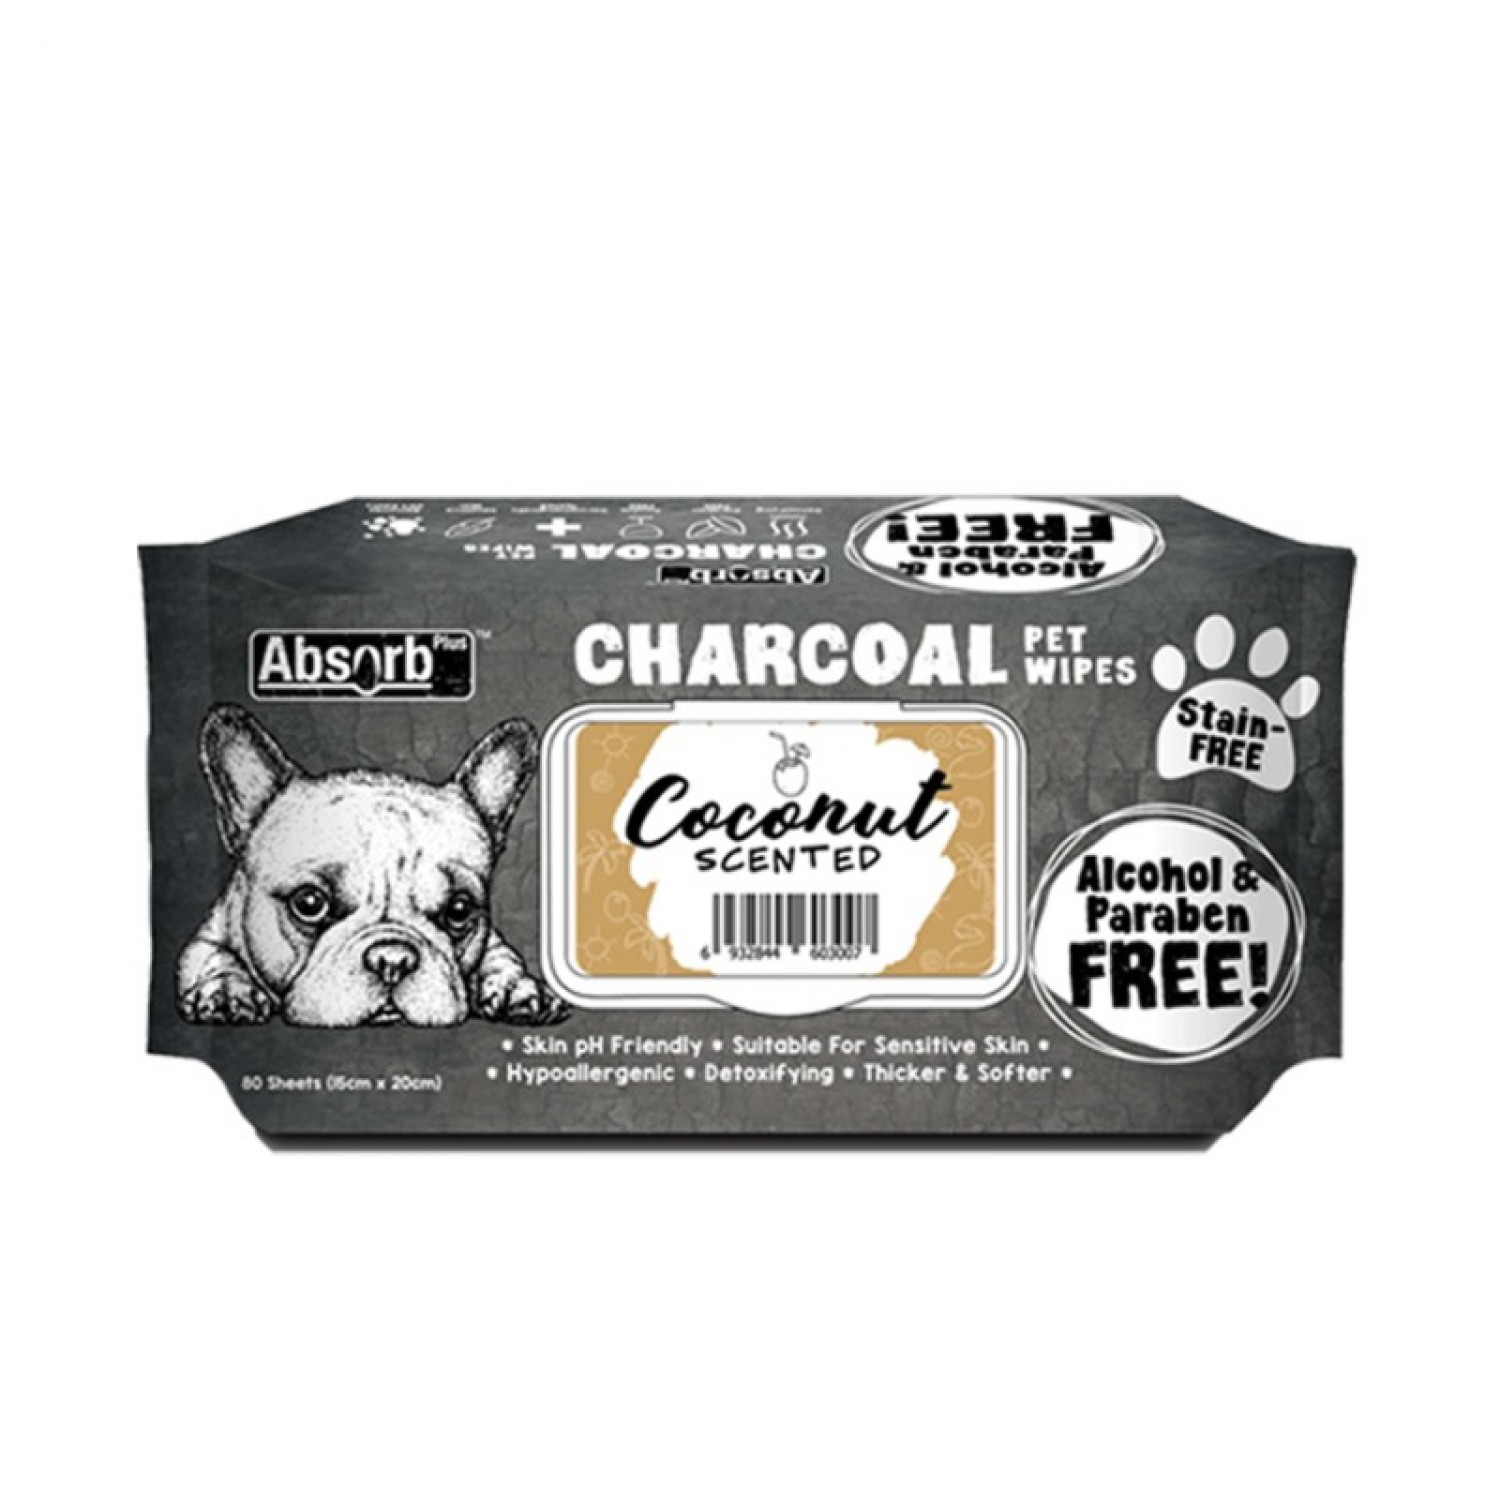 Absolute Pet Absorb Plus Charcoal Pet Wipes Coconut 80 sheets